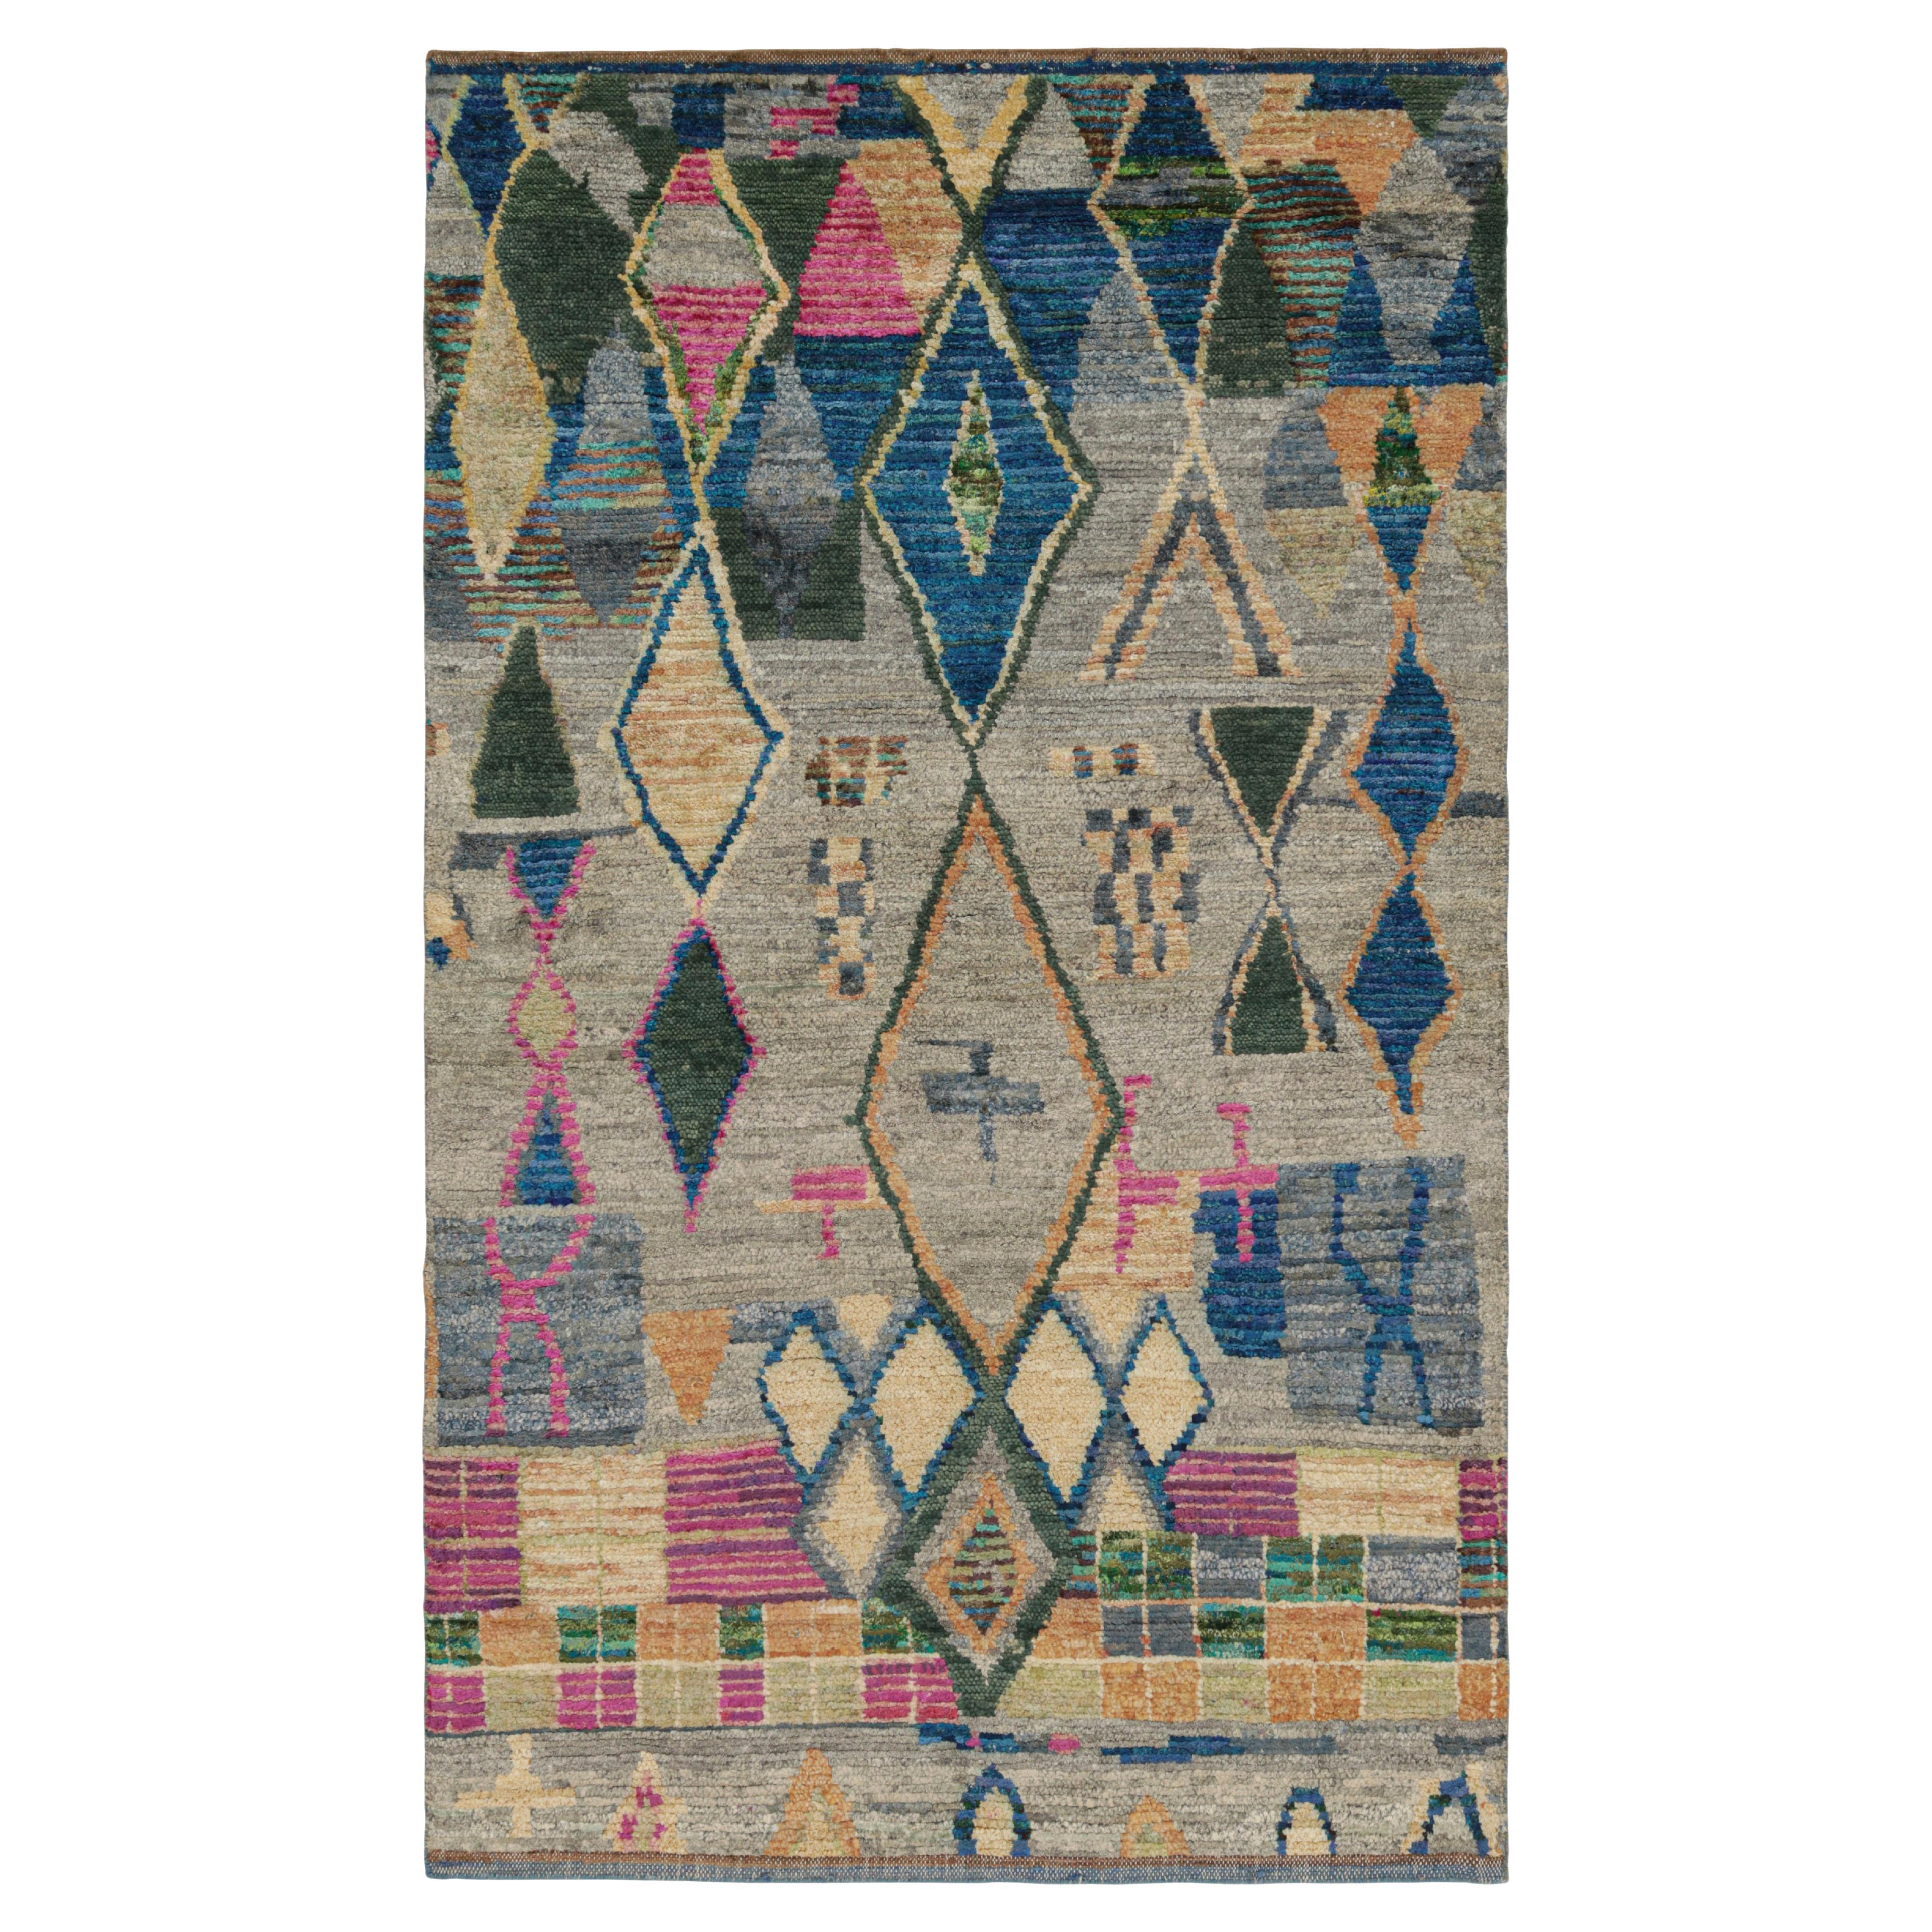 Rug & Kilim’s Contemporary Moroccan Style Rug Polychromatic Geometric Patterns